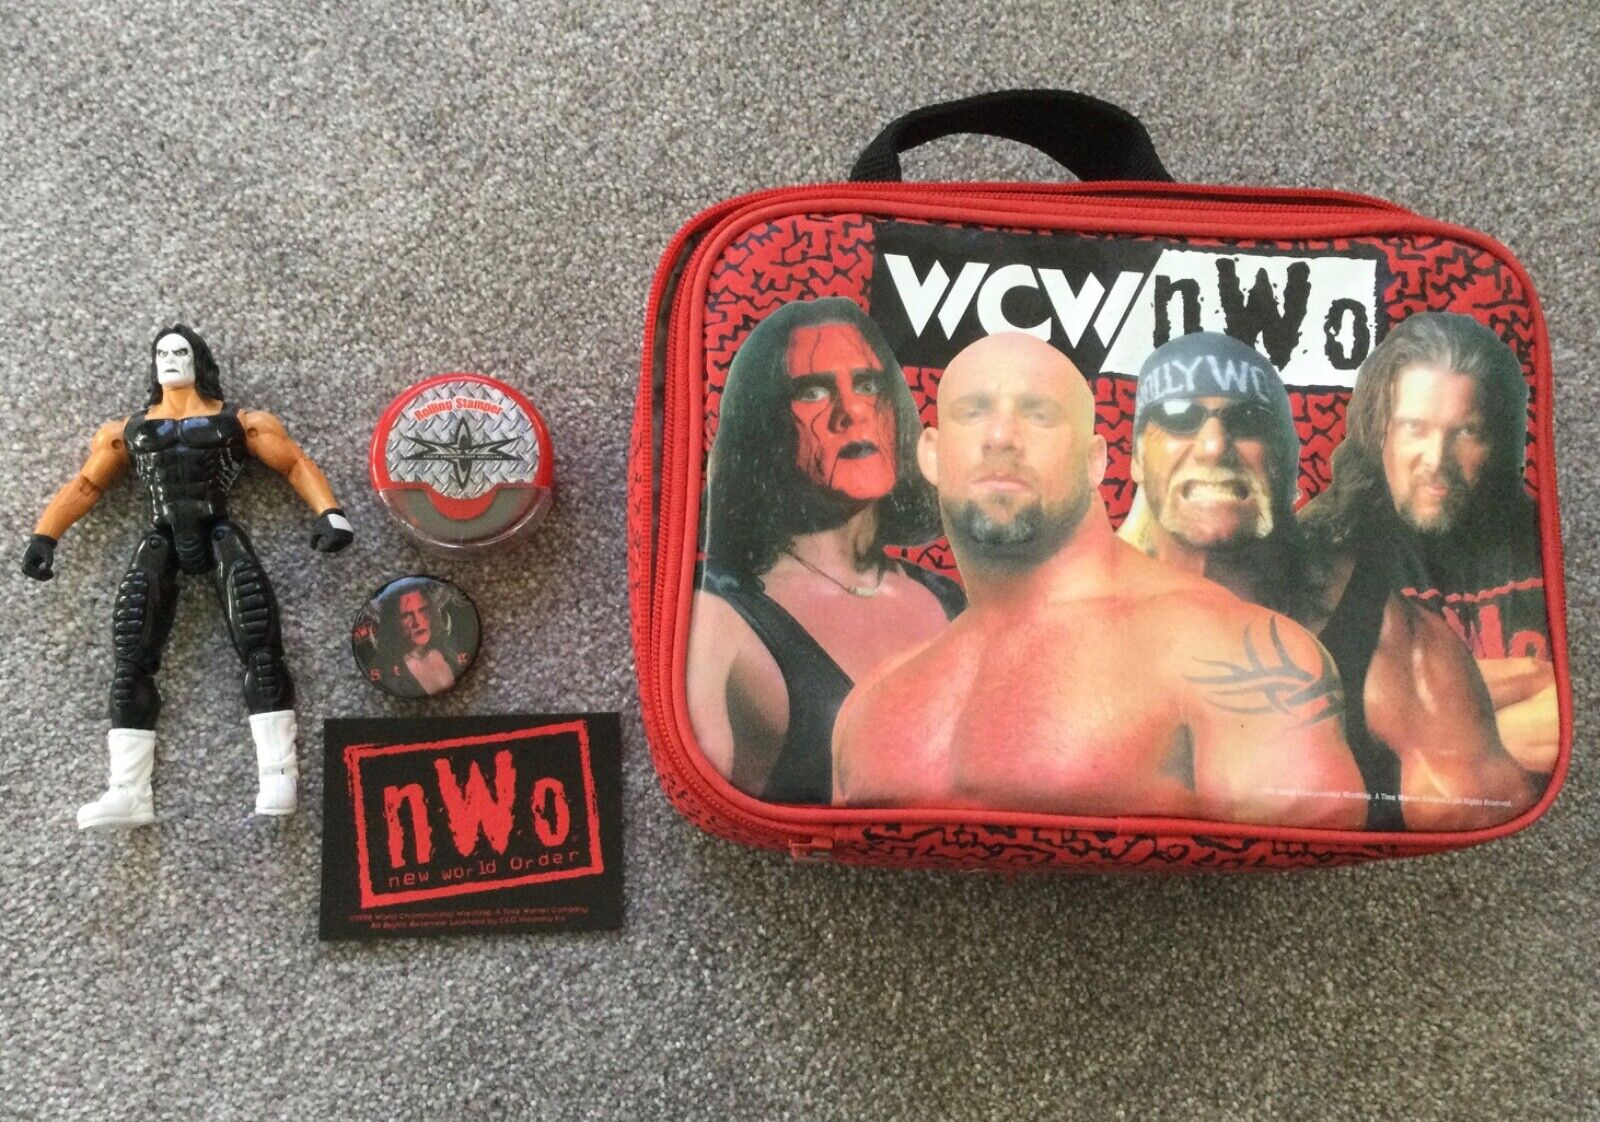 WCW/nWo lucnchbox/bag wrestling Wolfpac magnet & Sting pin (1998) stamp roller Без бренда